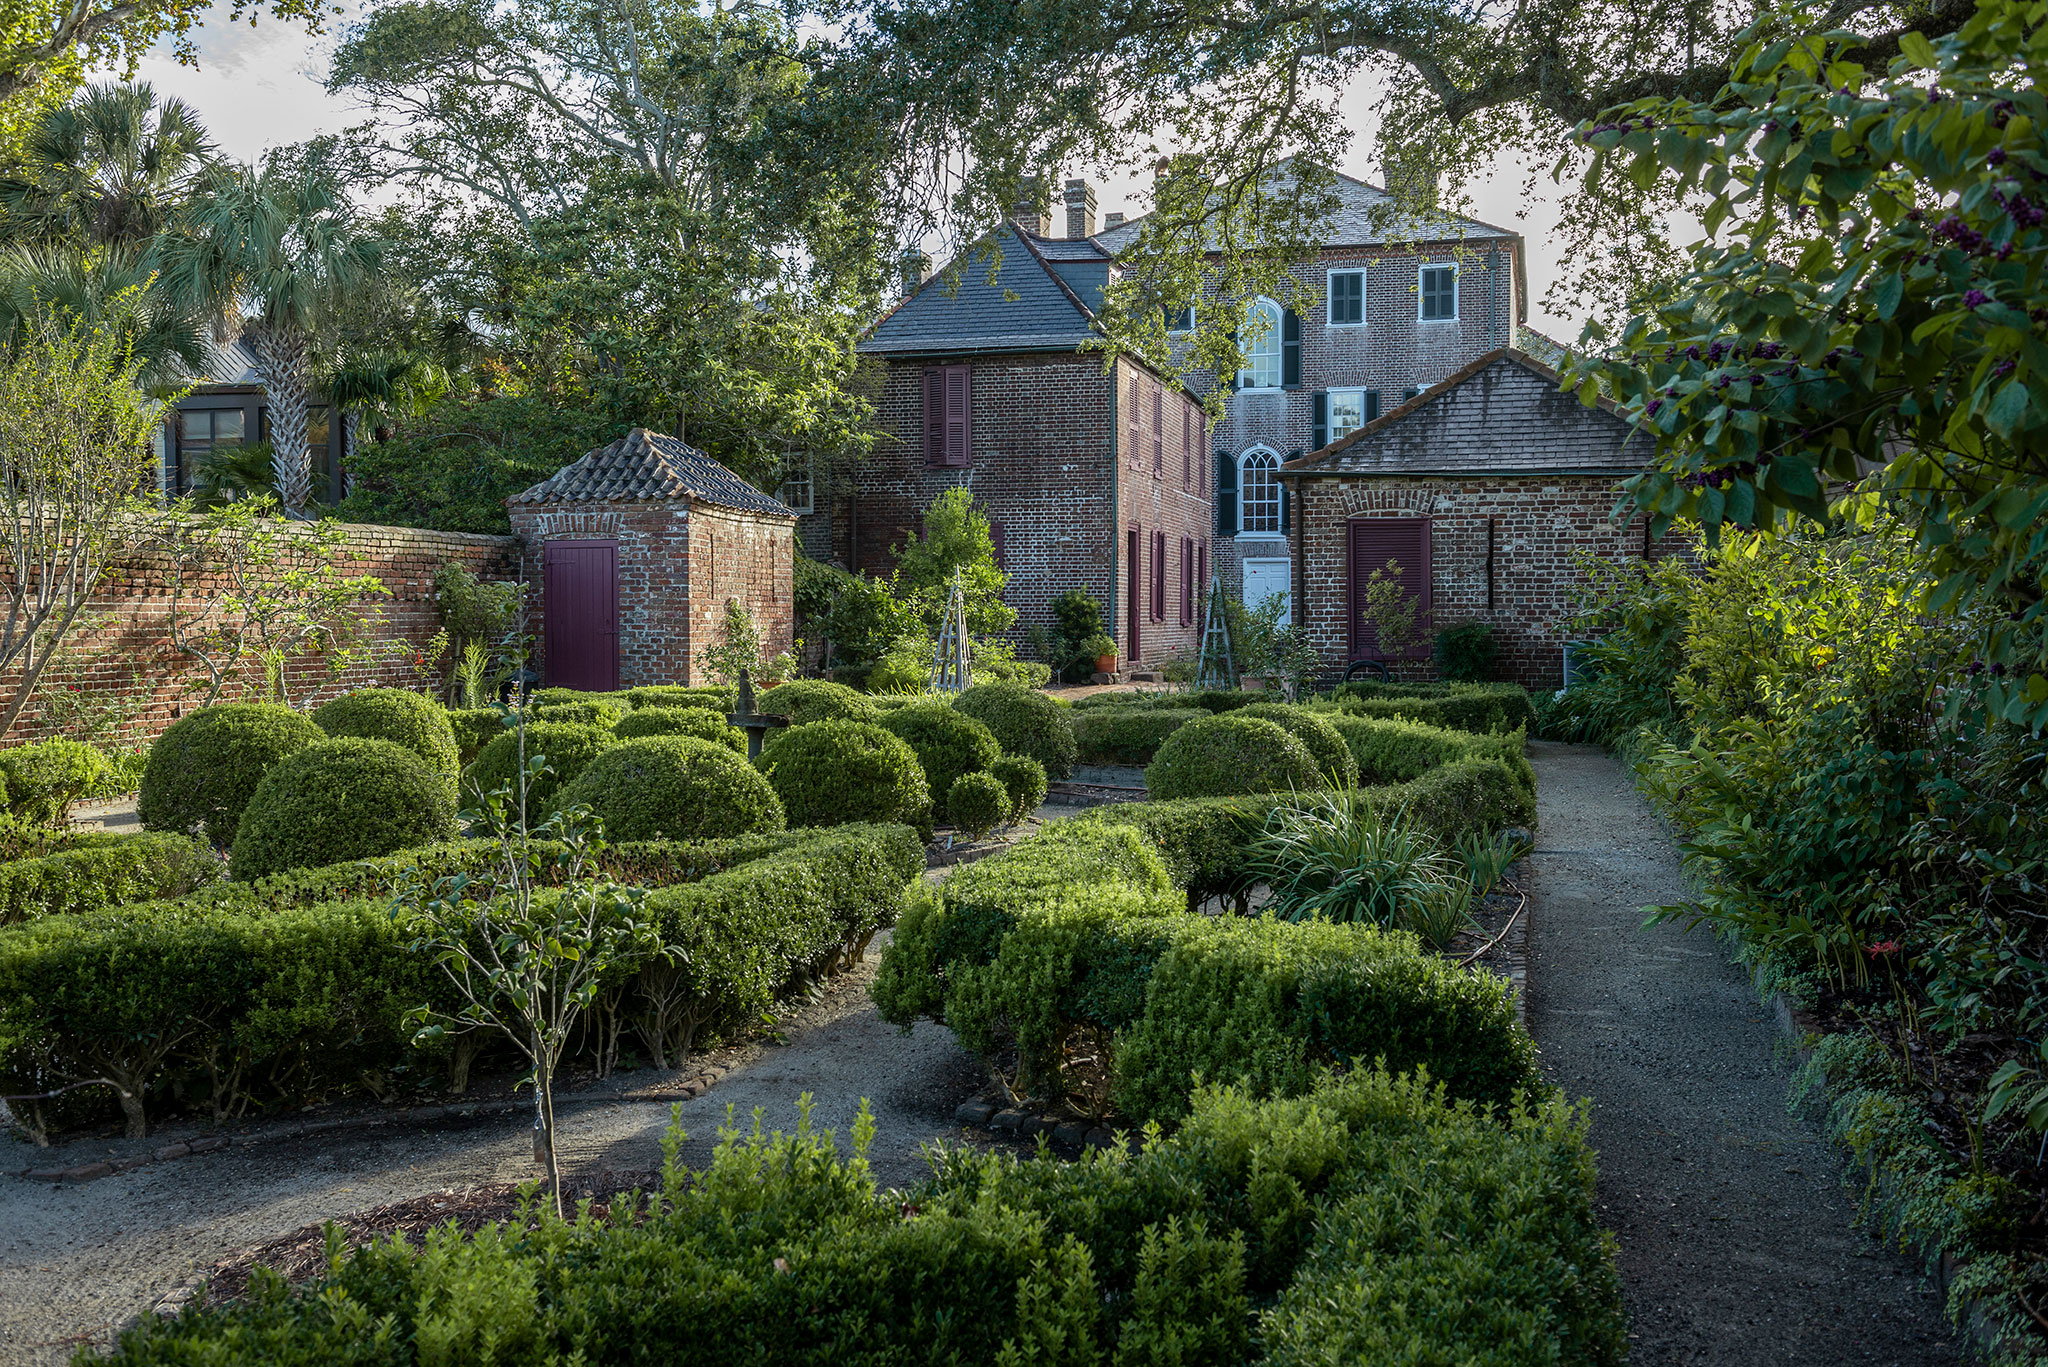 Exclusive Archaeology Tour: The Heyward-Washington House with Curator of Historical Archaeology Martha Zierden and Dr. Sarah Platt of the College of Charleston